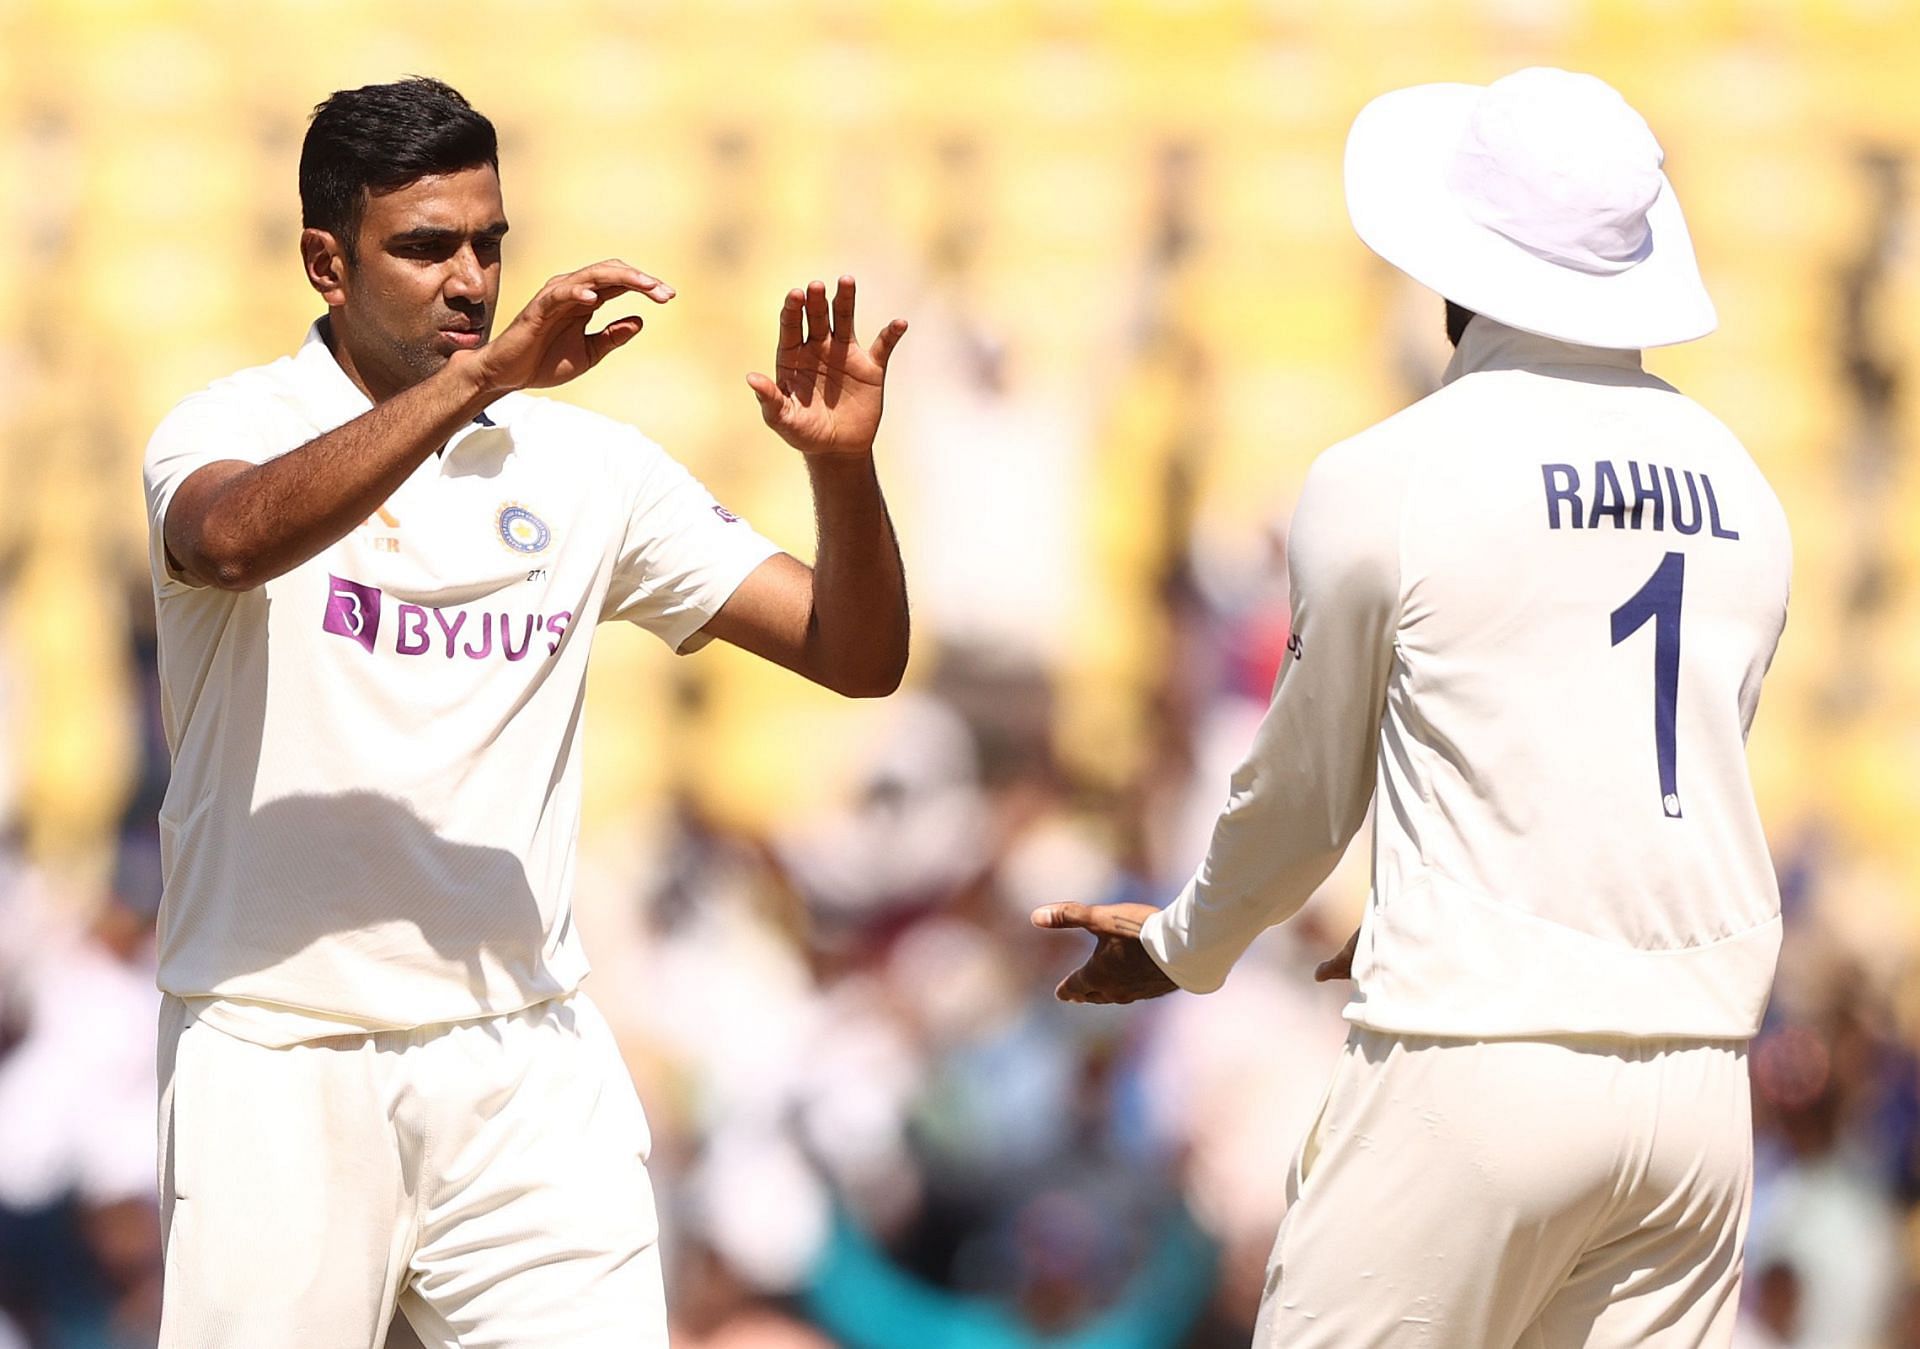 Ashwin could be crucial for India